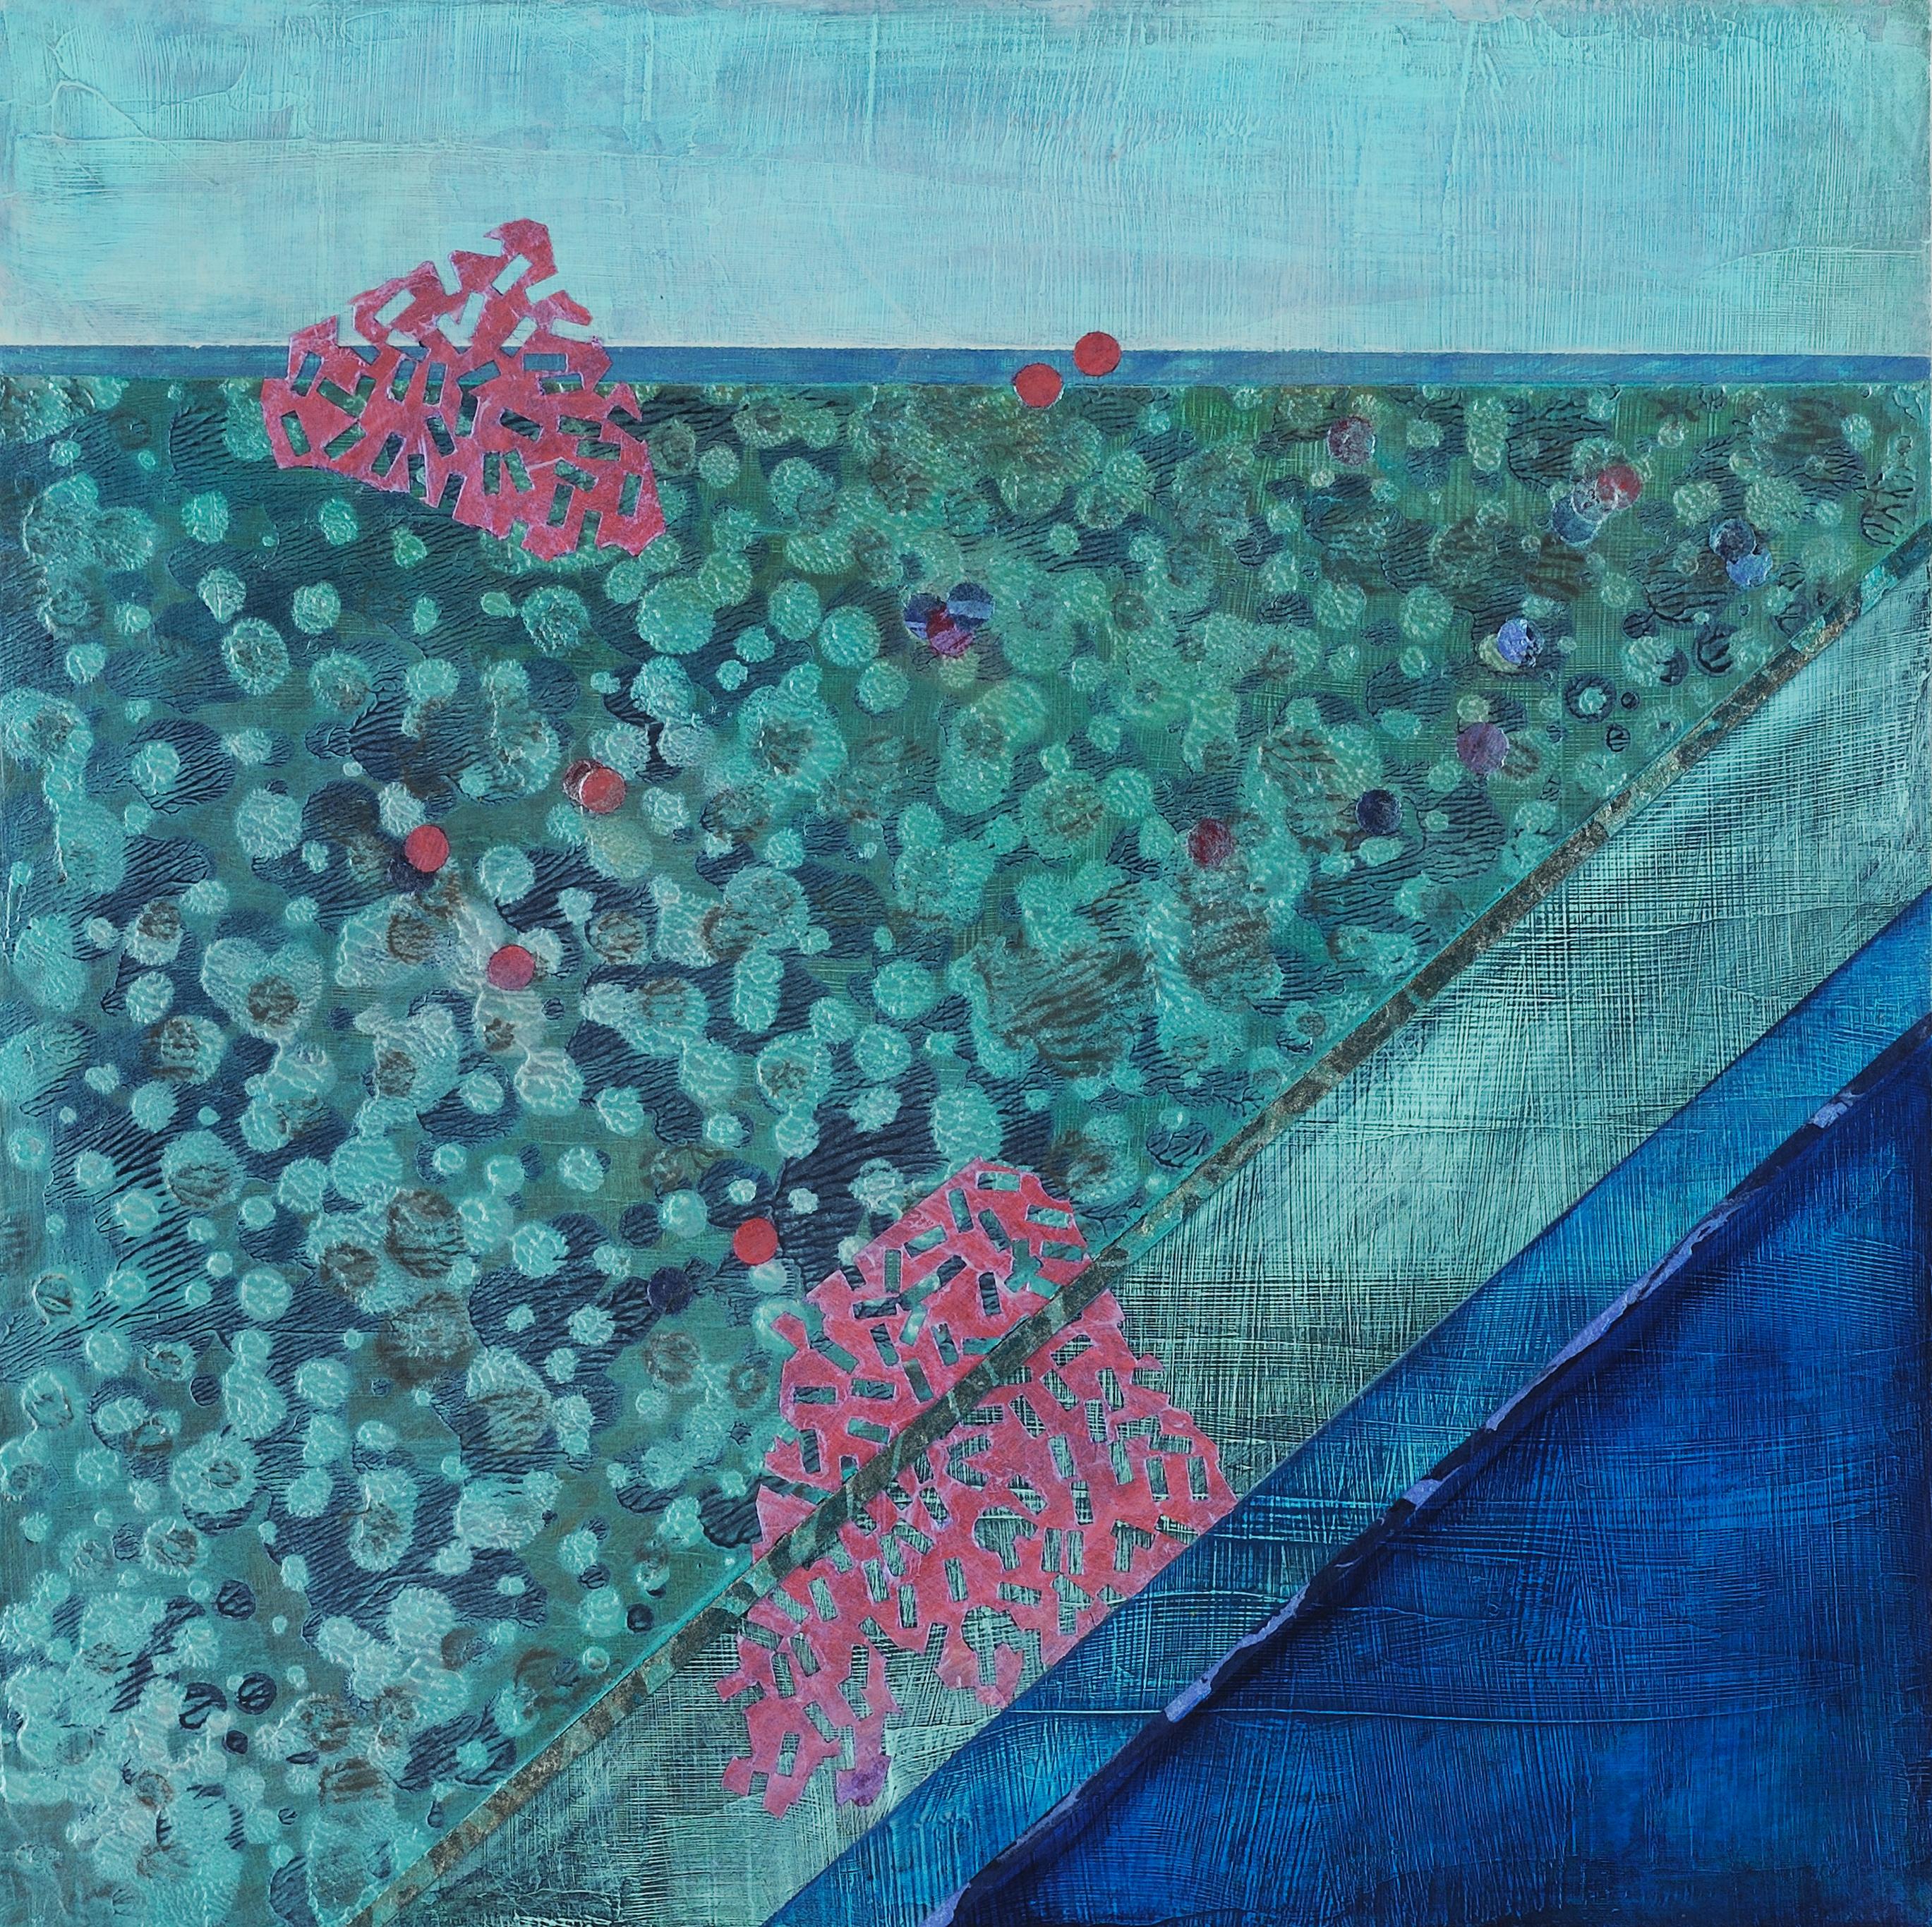 Crossing Lines, Intersections #7, blue and green mixed media painting